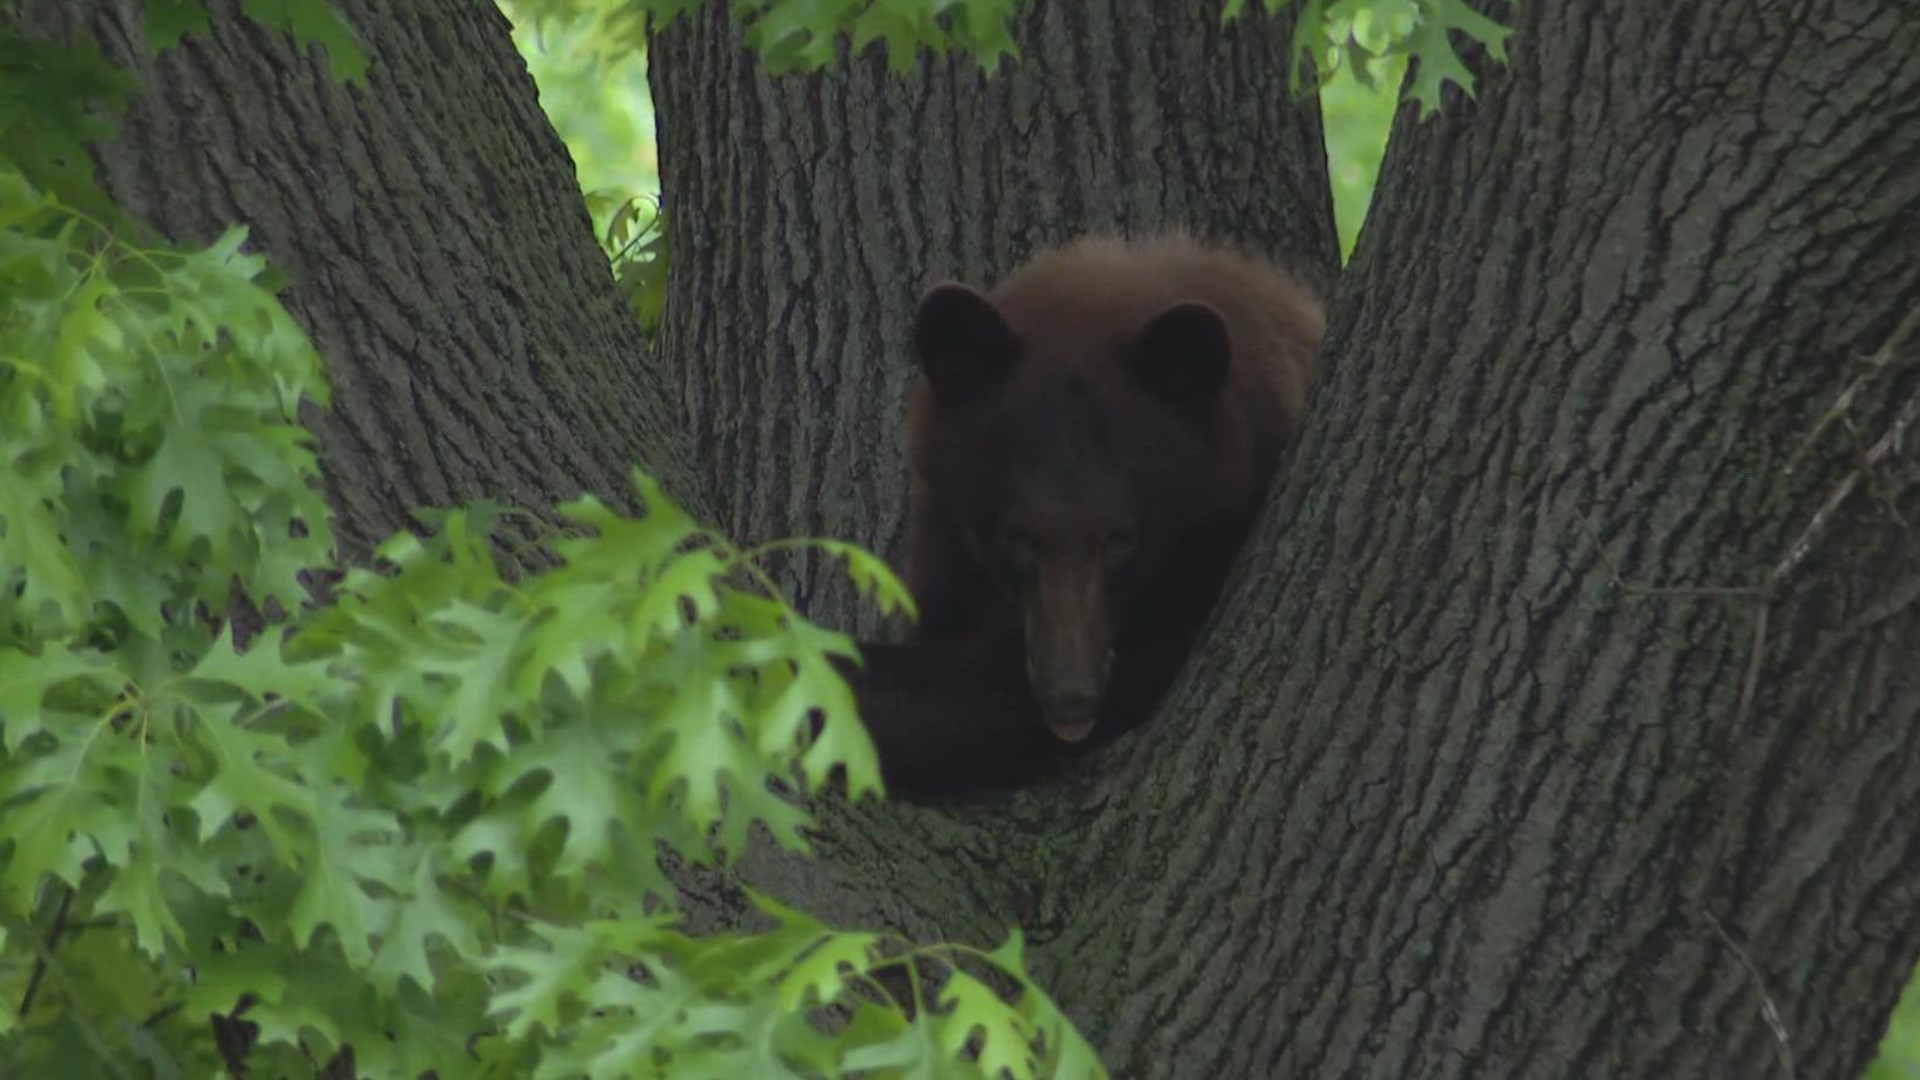 On Monday, the first bear hunting season begins in Missouri.